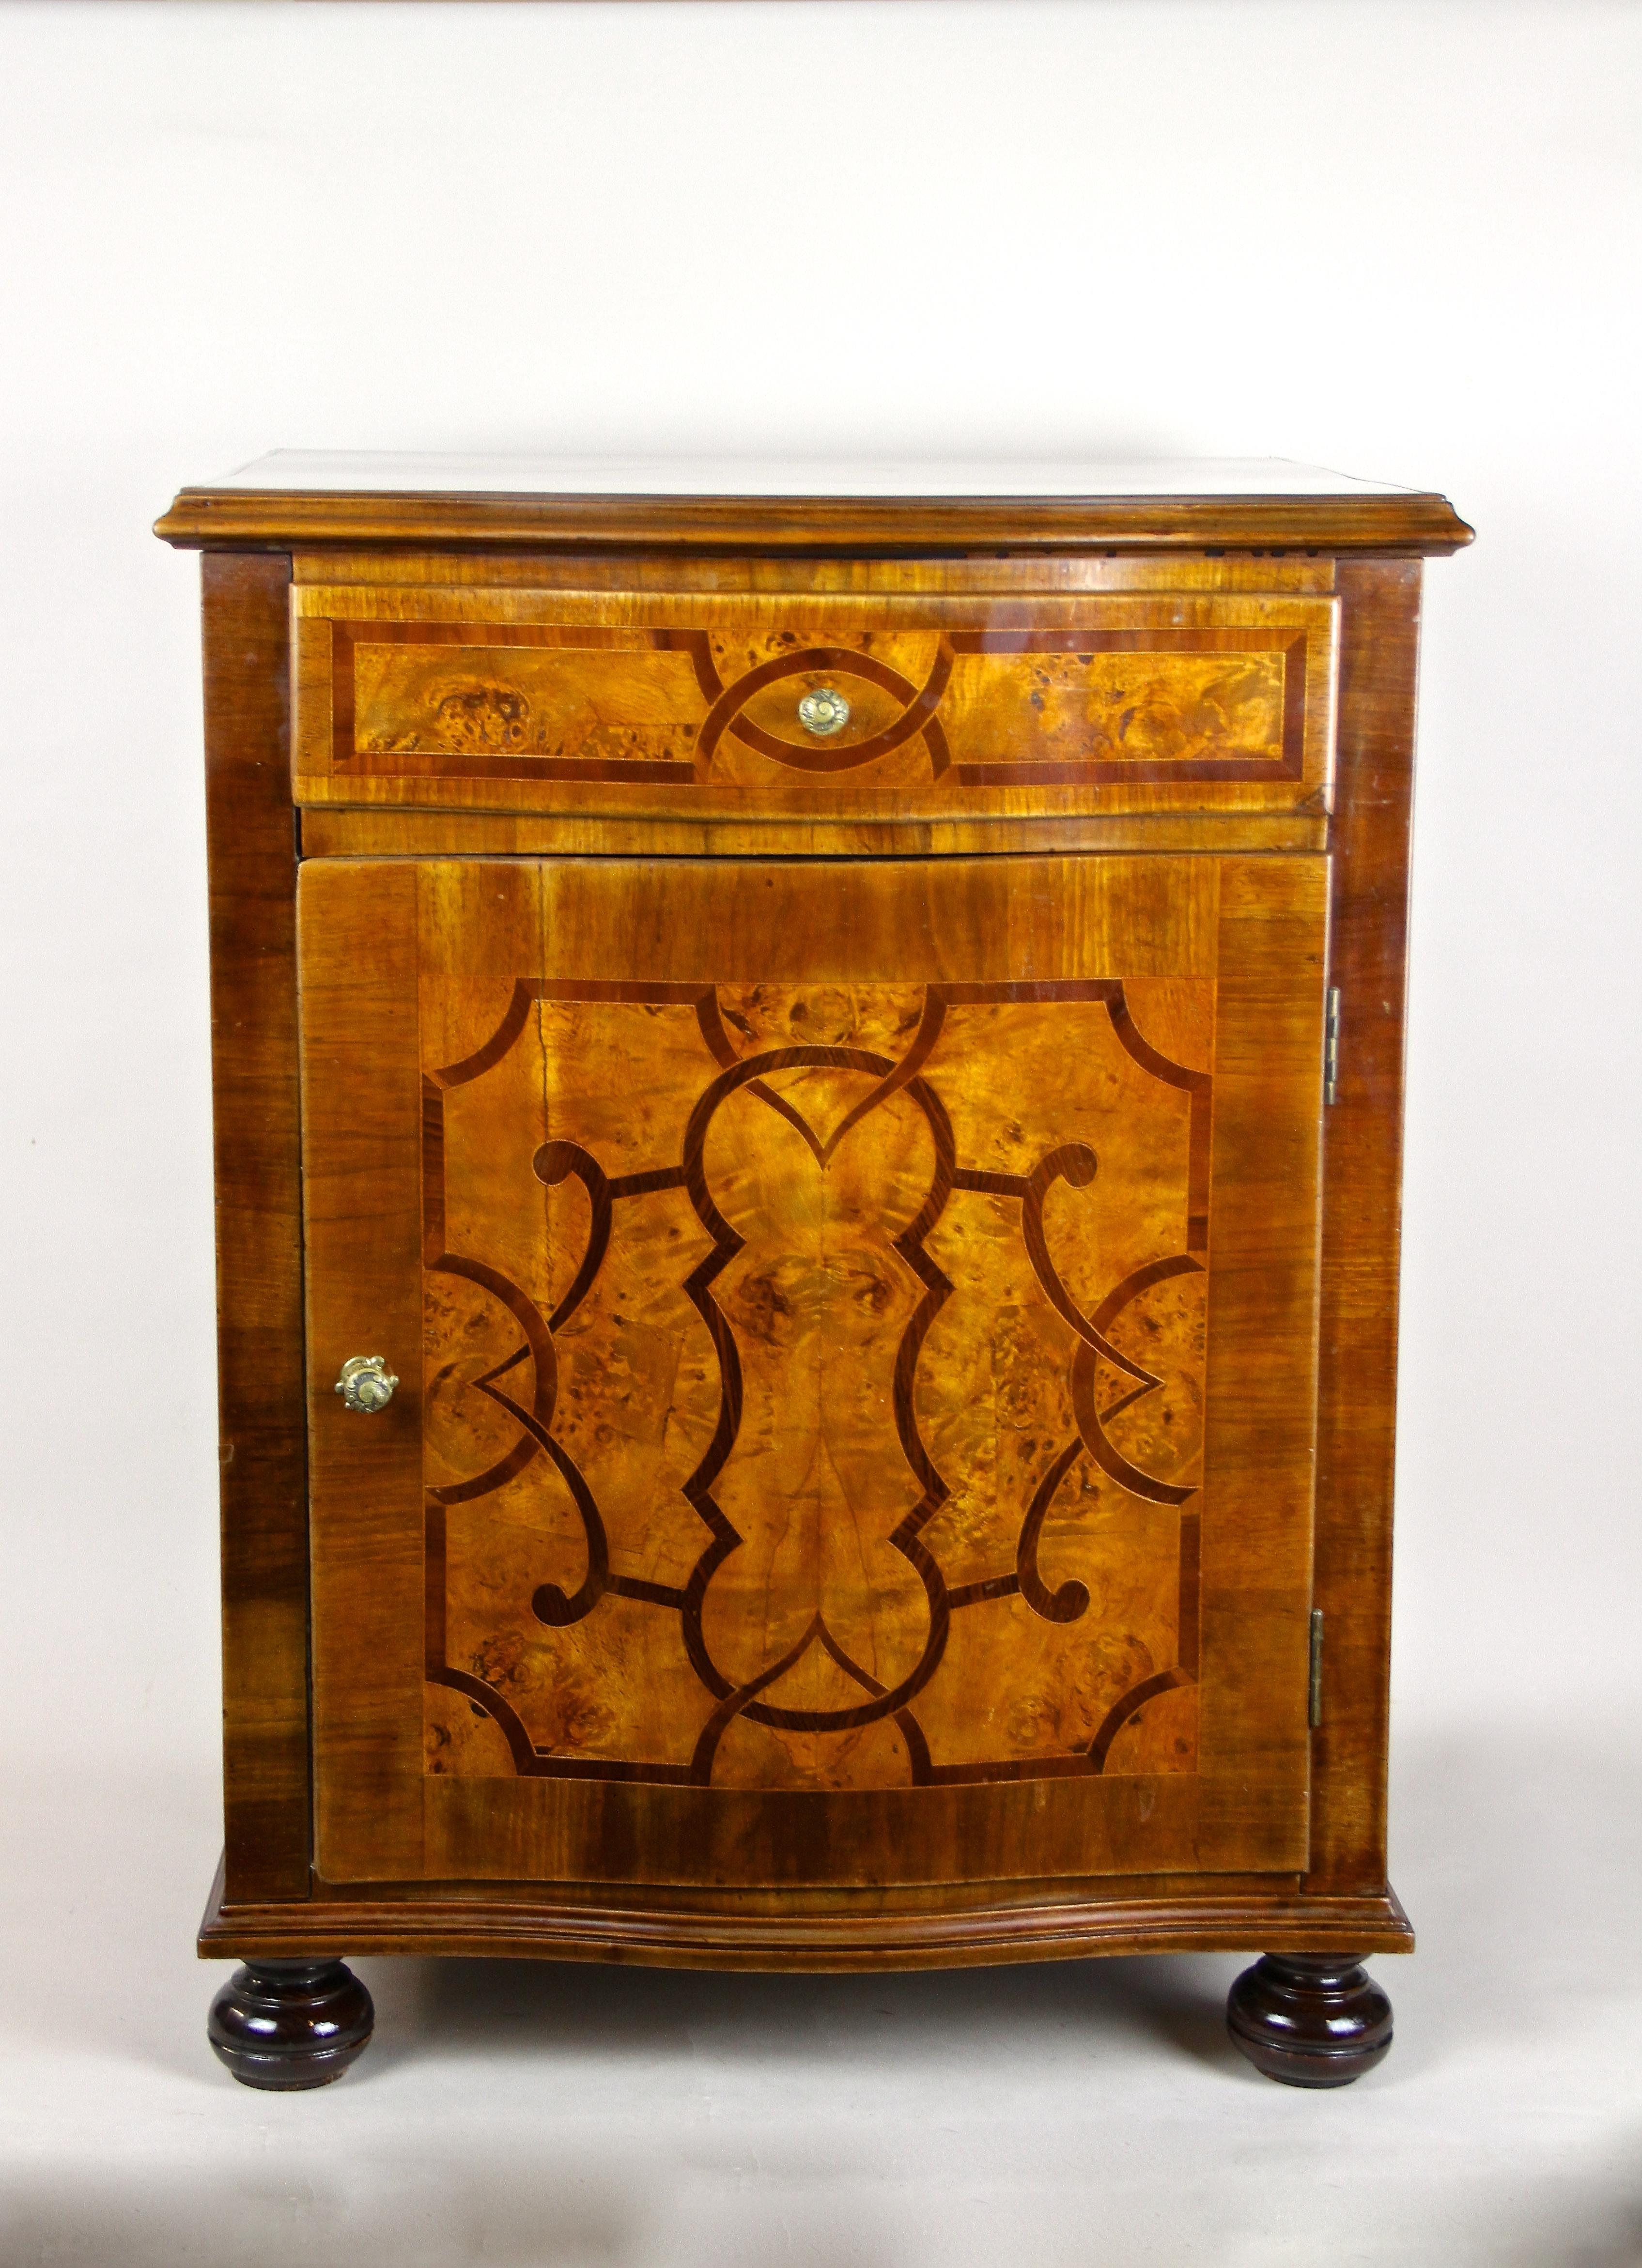 Beautiful Baroque Revival Marquetry Half Cabinet from the late 19th century in Austria. This mid-sized baroque cabinet from around 1890 impresses with fantastic inlay works and provides a big door and a drawer above. A lovely shaped piece of